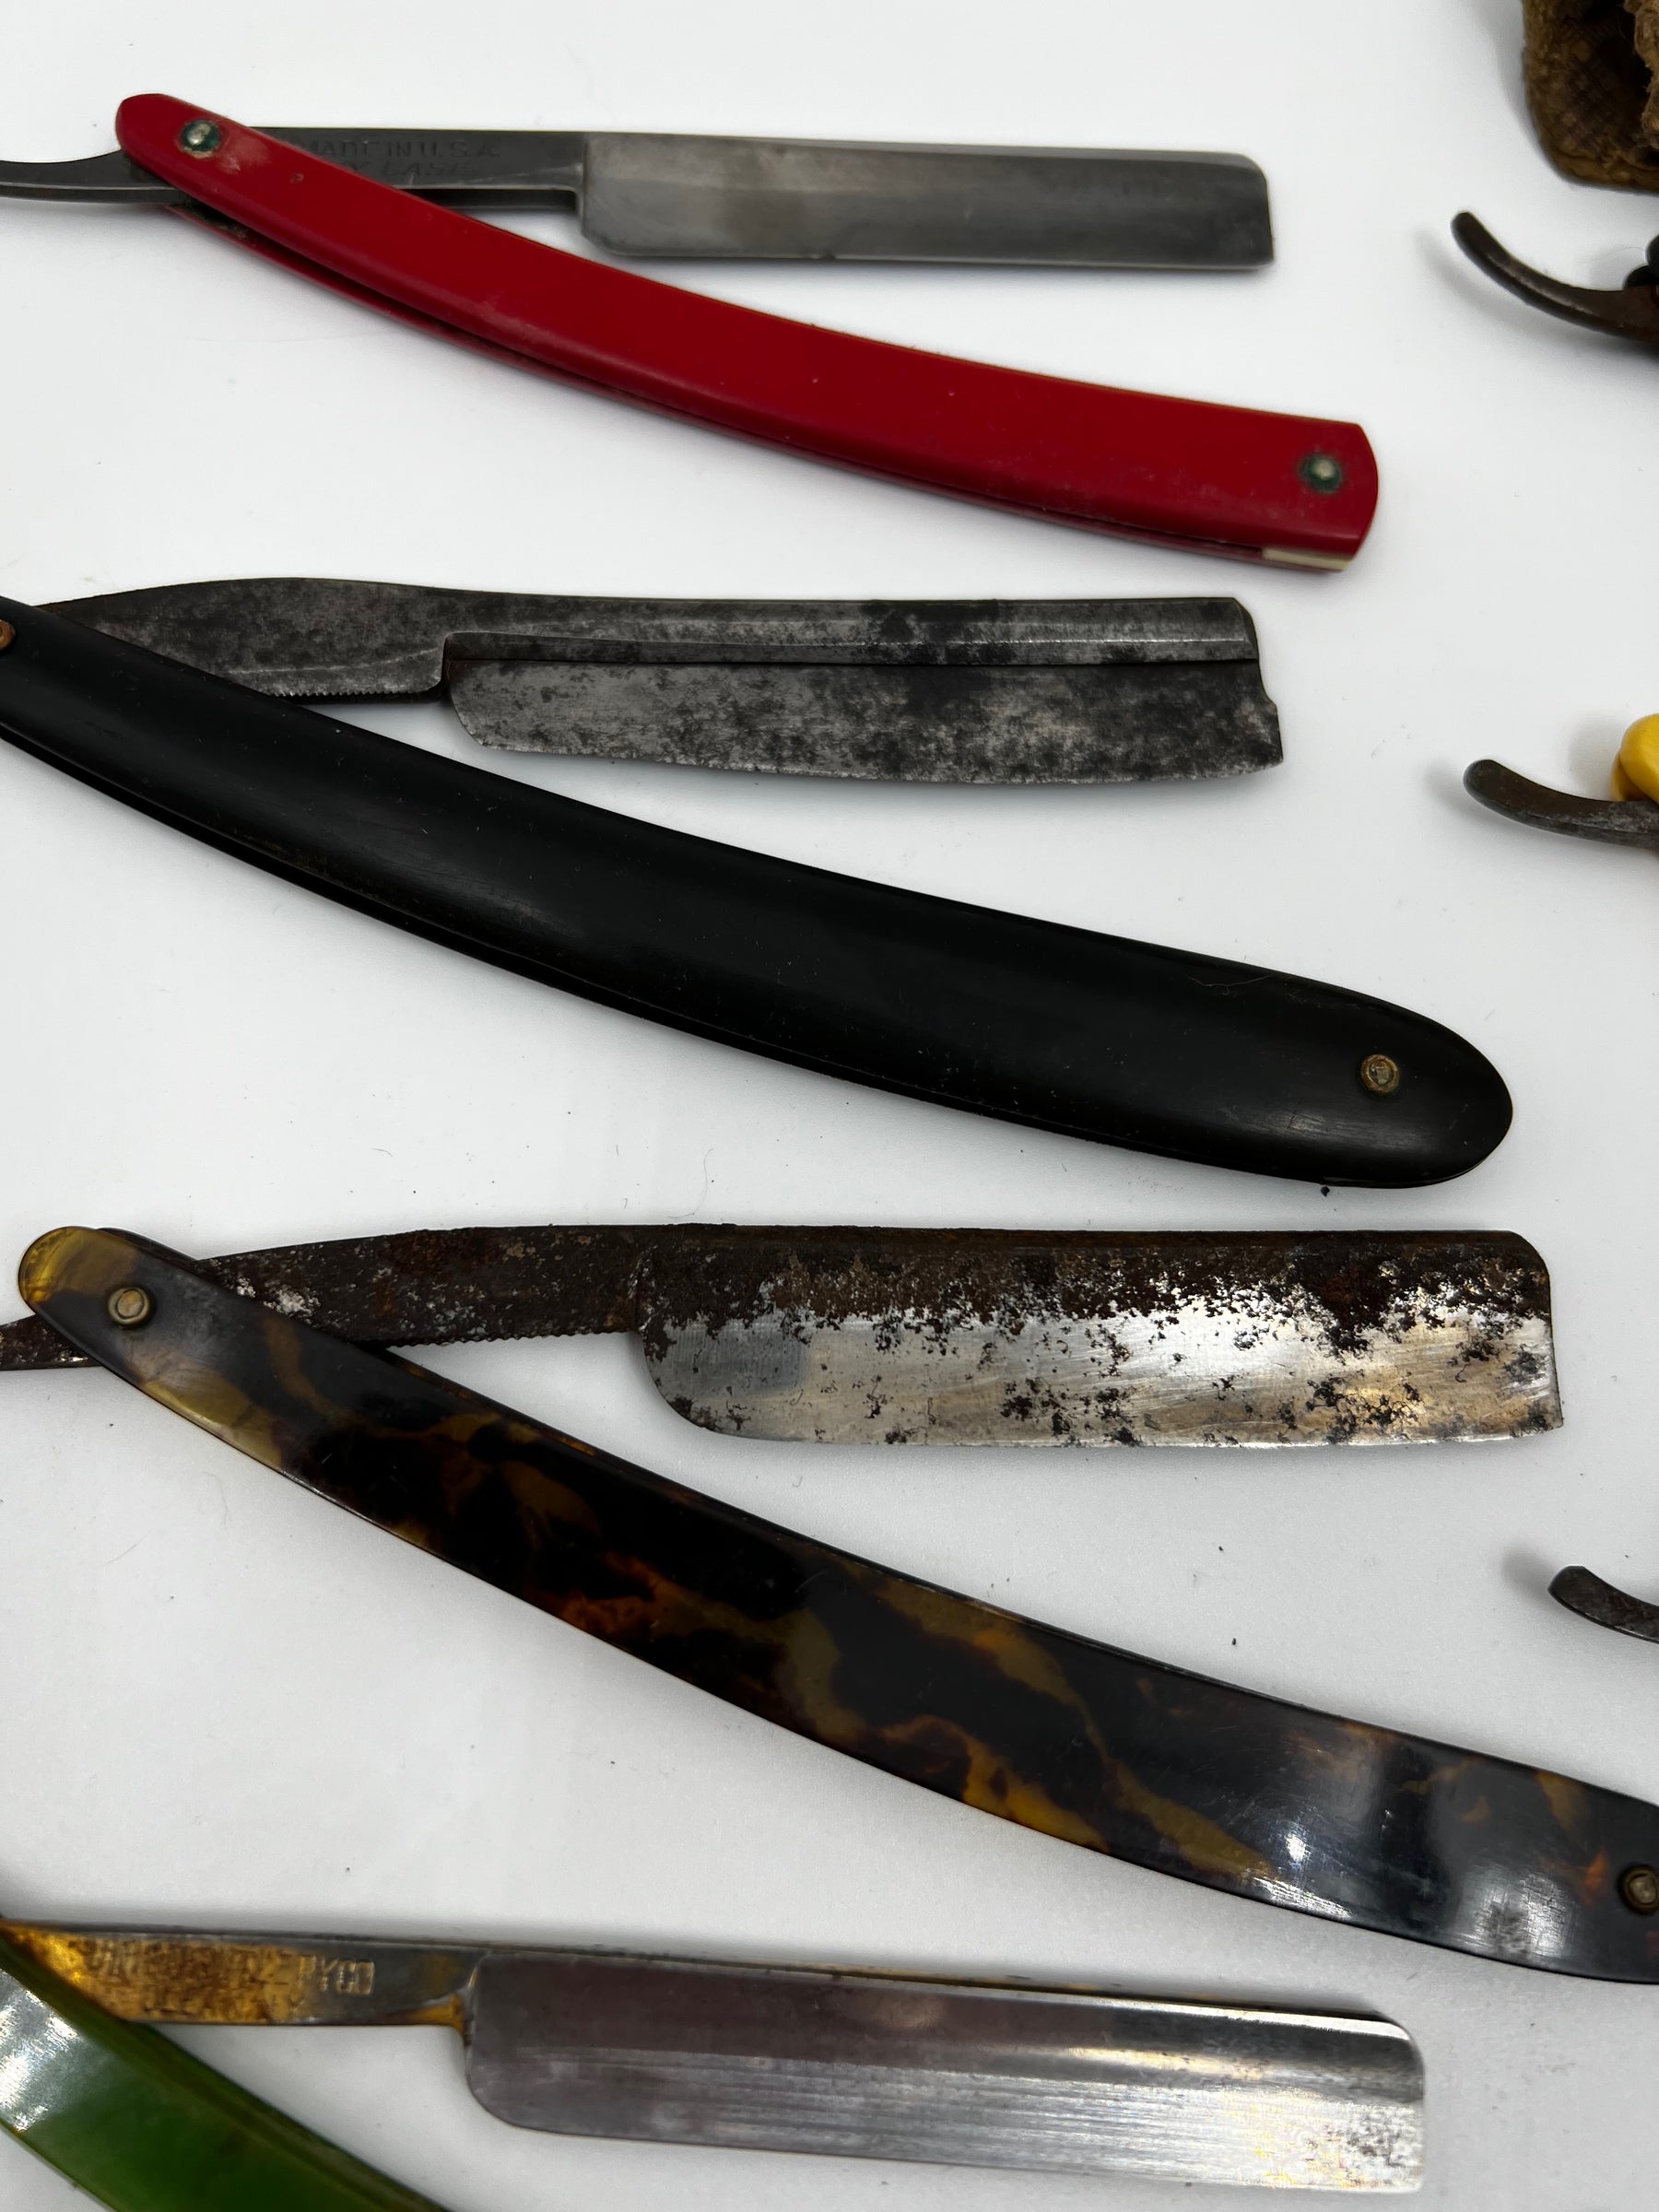 Vintage 10 Straight Razor Lot #11 - May Contain Sheffield, Solingen, Japanese & USA makers, as pictured